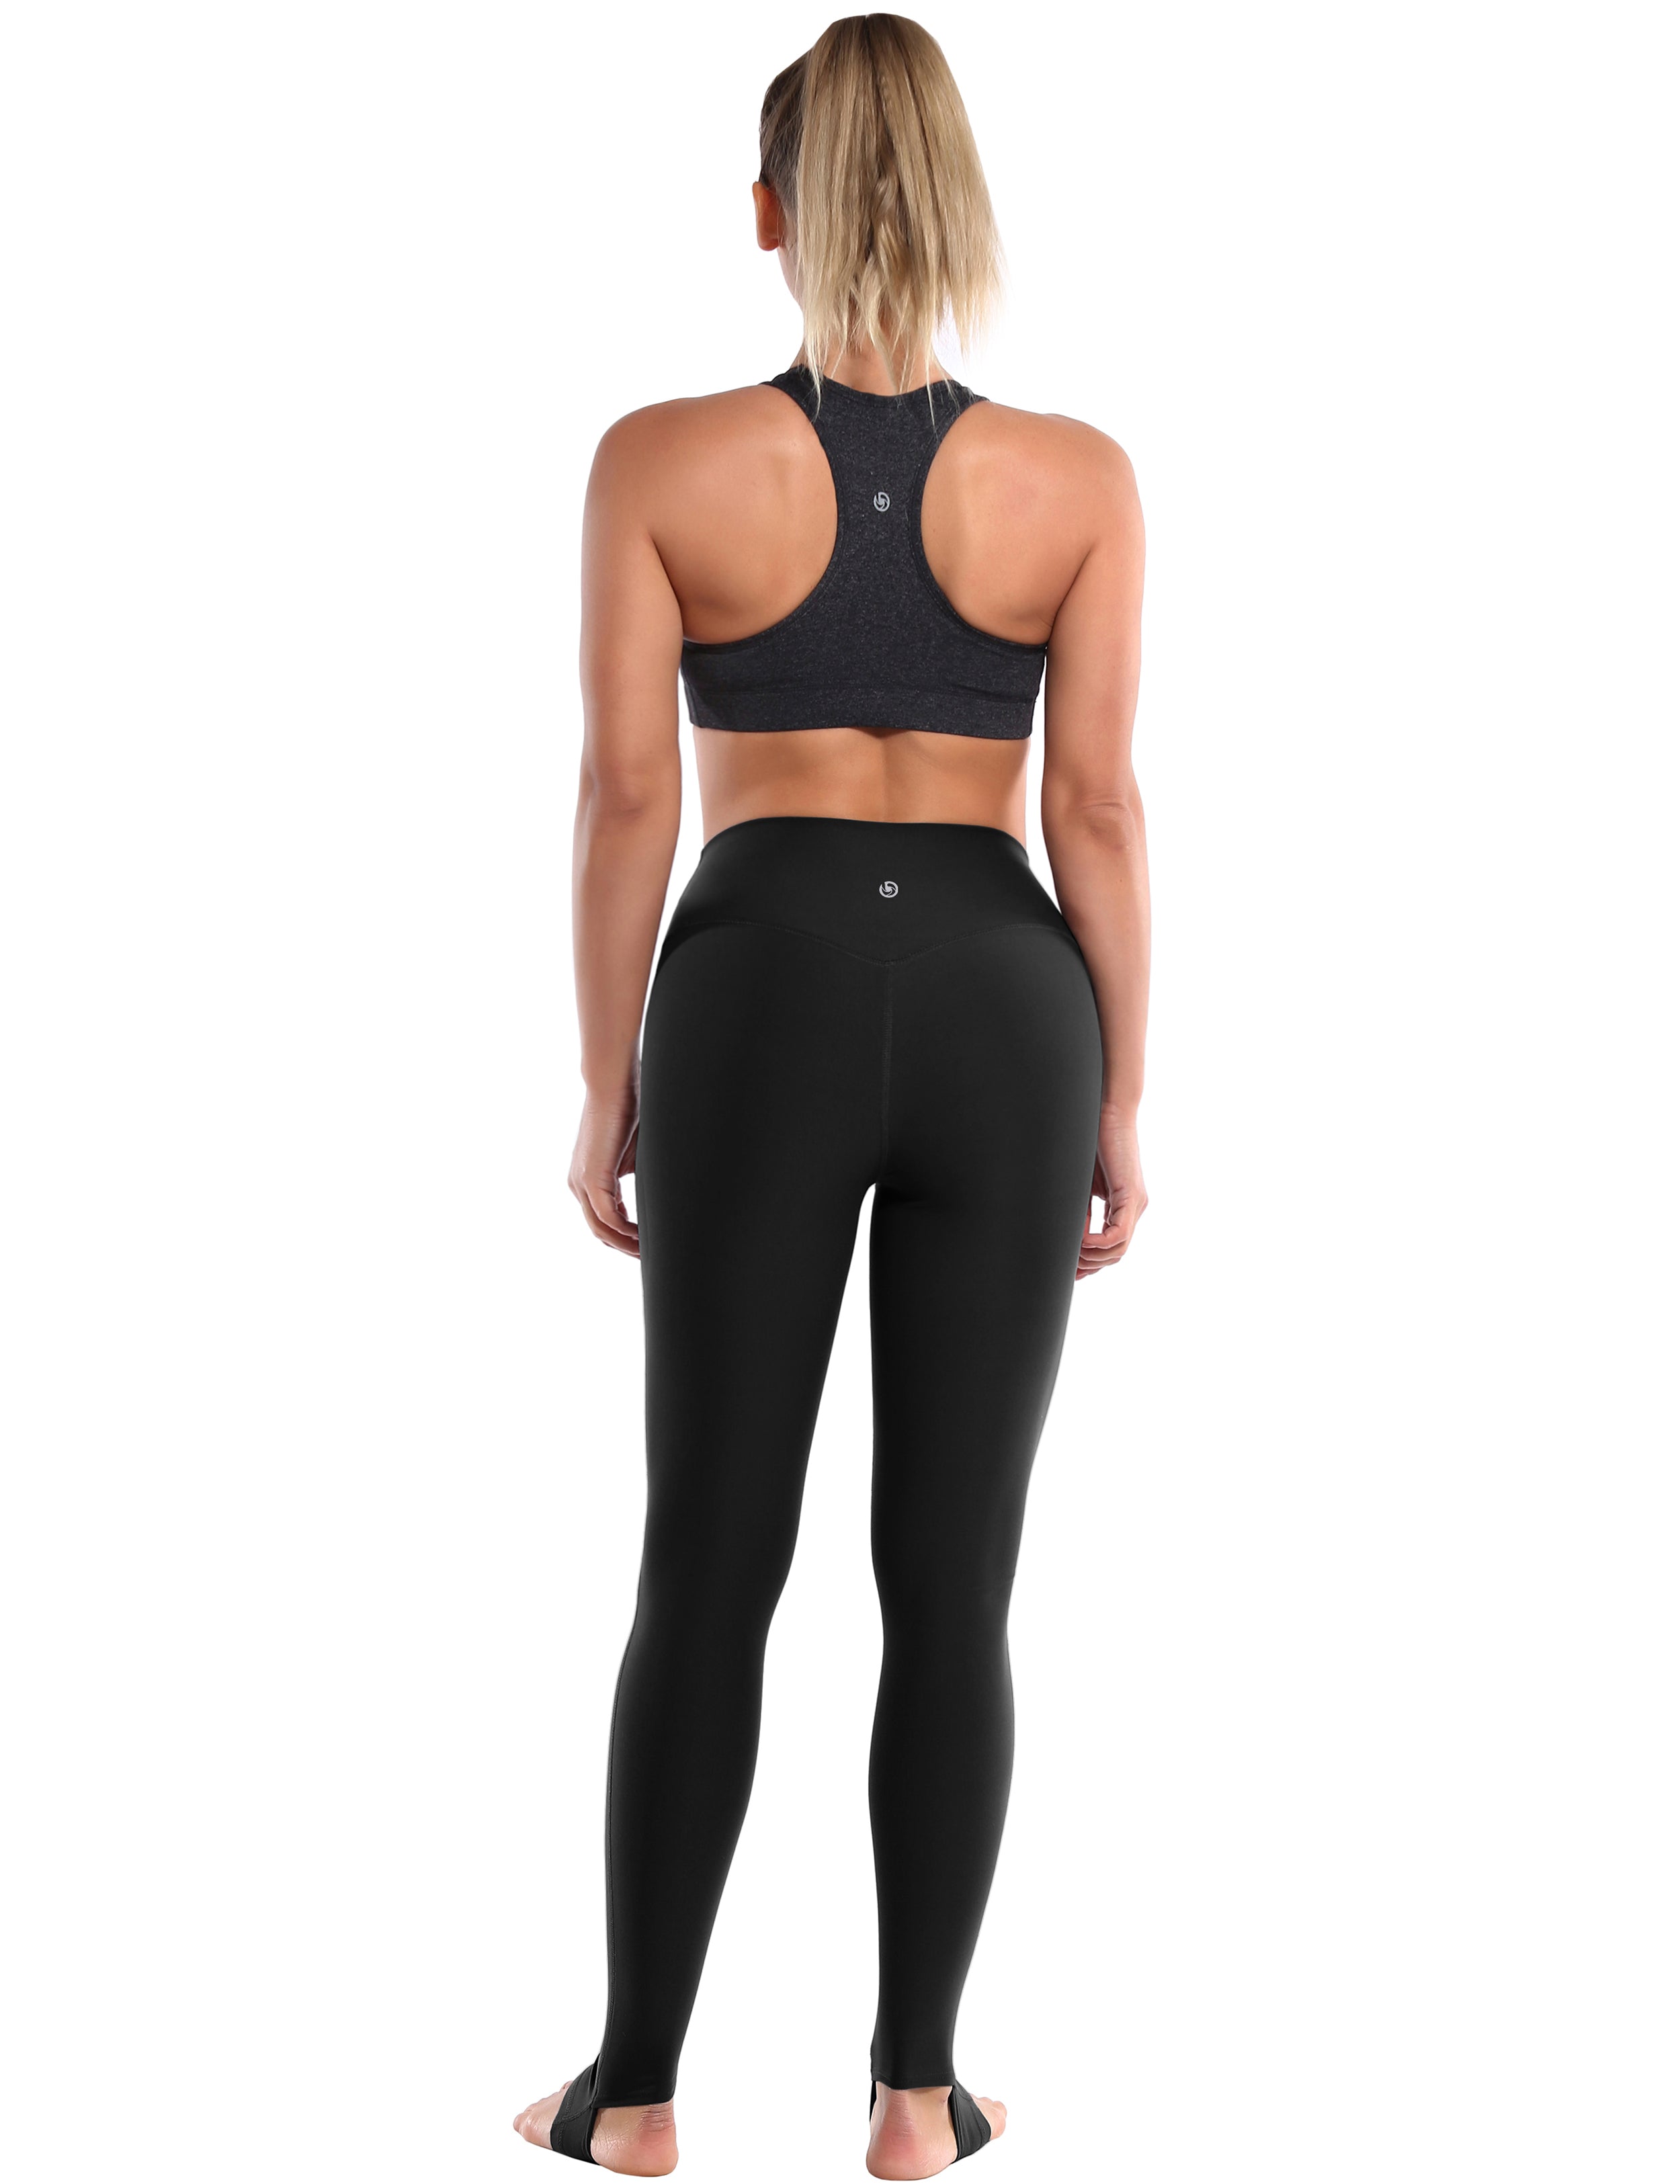 Over the Heel Golf Pants black Over the Heel Design 87%Nylon/13%Spandex Fabric doesn't attract lint easily 4-way stretch No see-through Moisture-wicking Tummy control